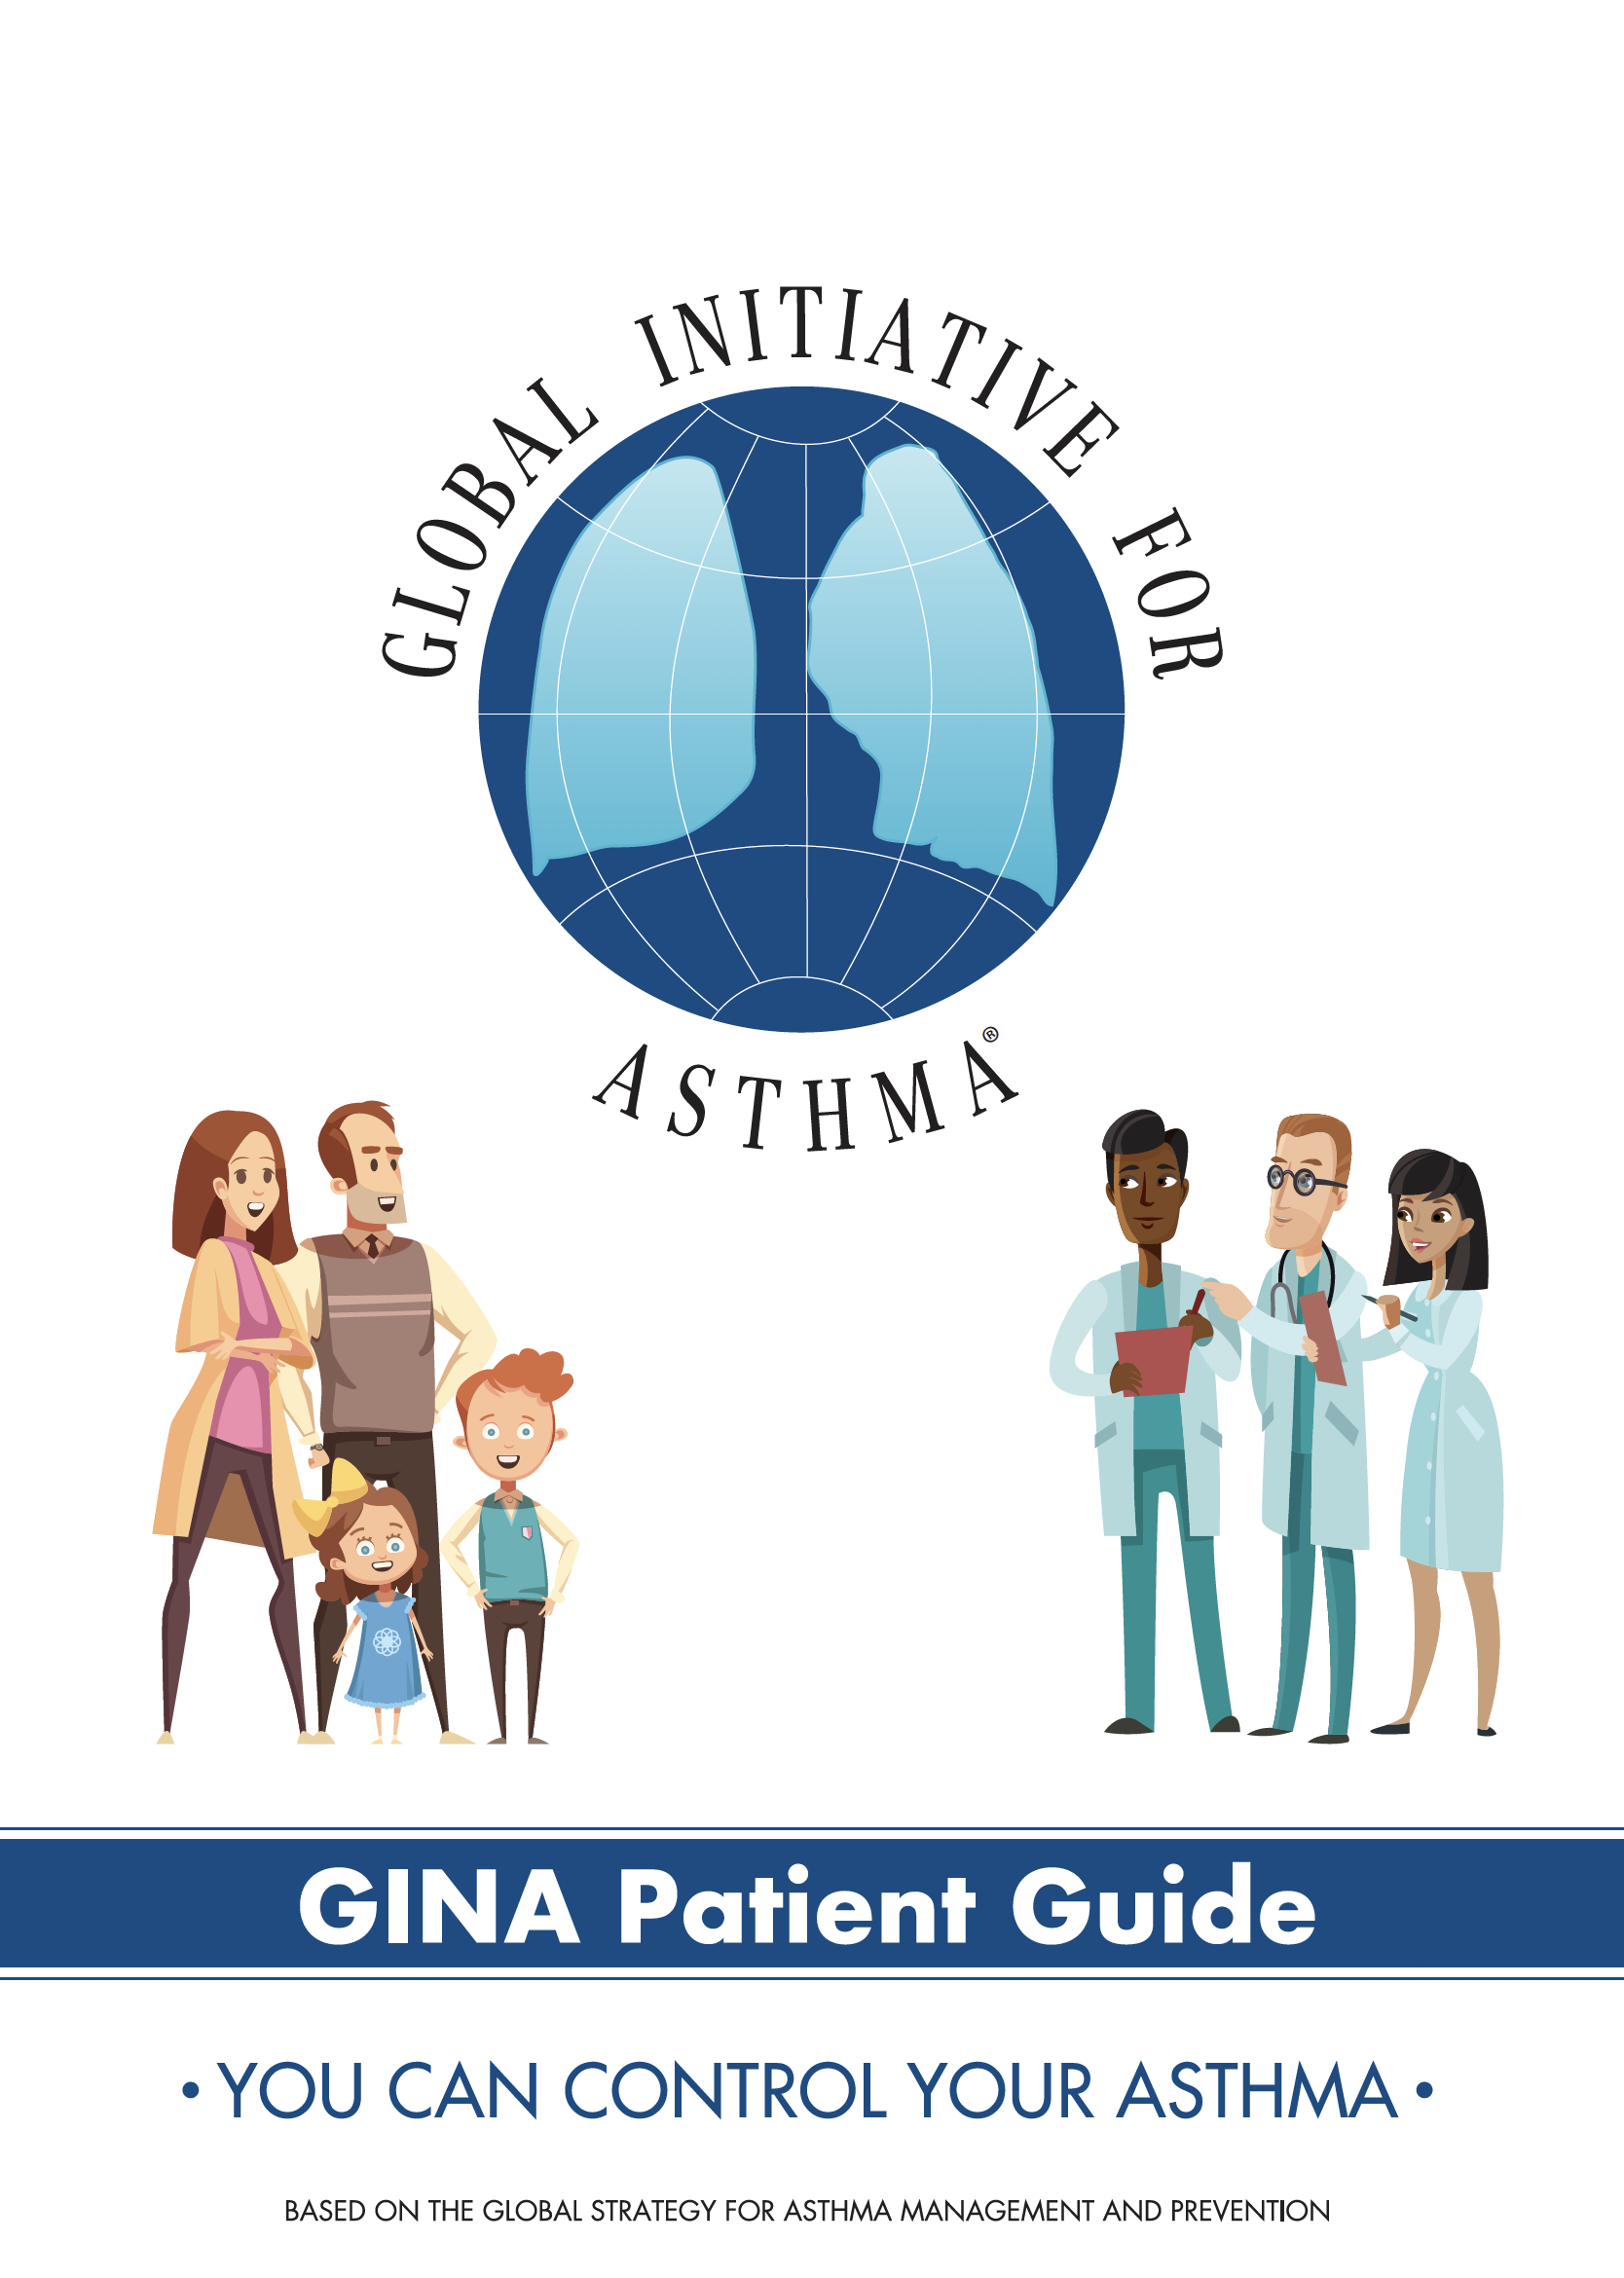 GINA Patient Guide for Asthma: You can control your asthma